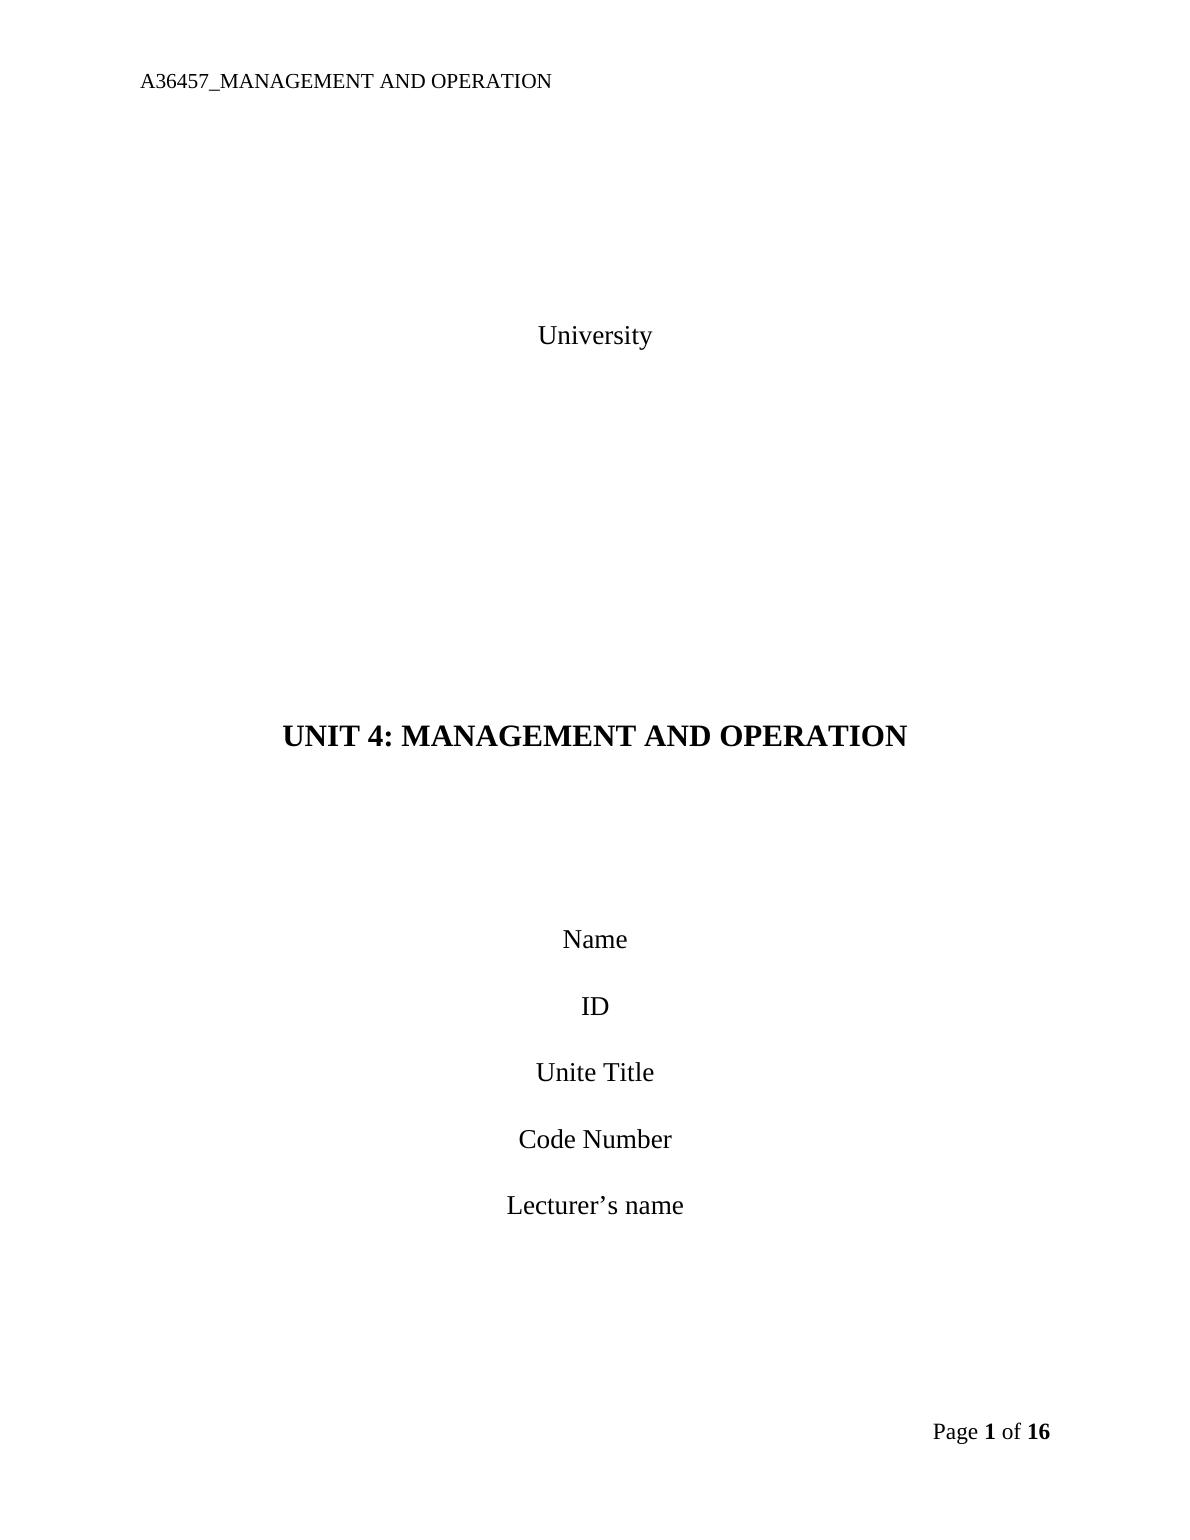 A36457 Management and Operation_1